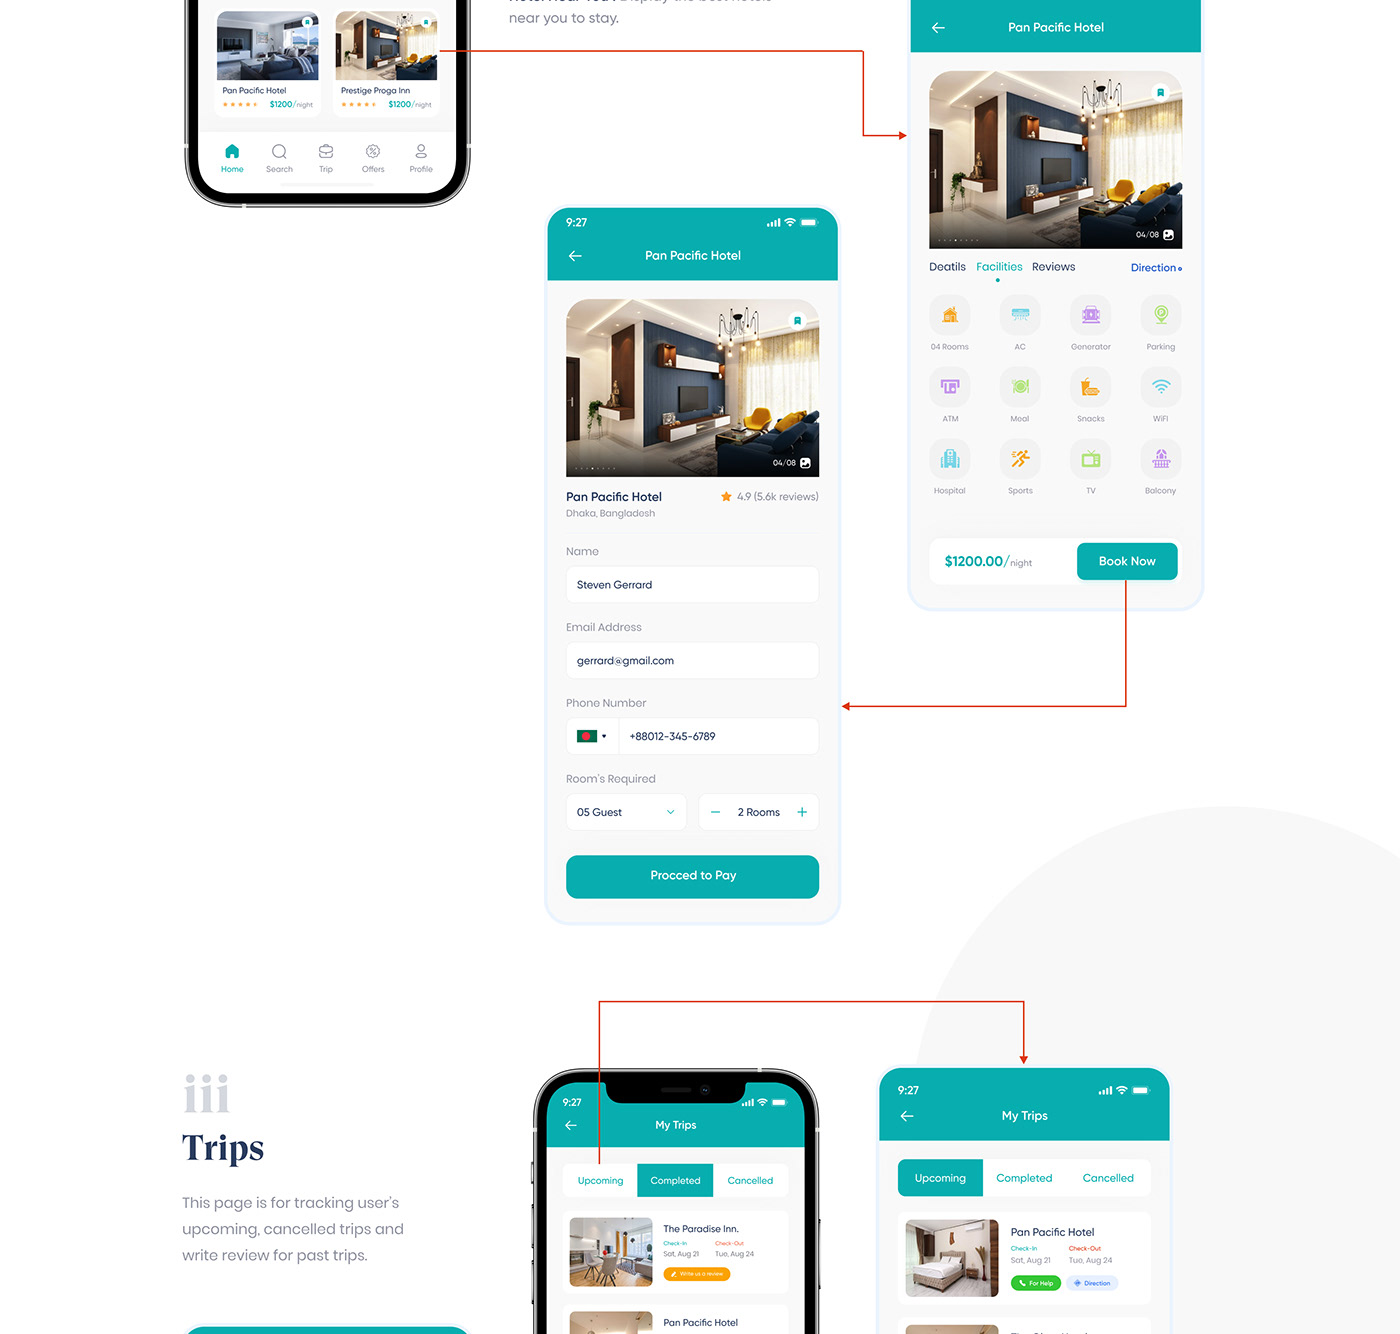 Case Study Flight Booking hotel booking tour app Travel App travel app case study travel booking UI Case study UX Case Study UX Research